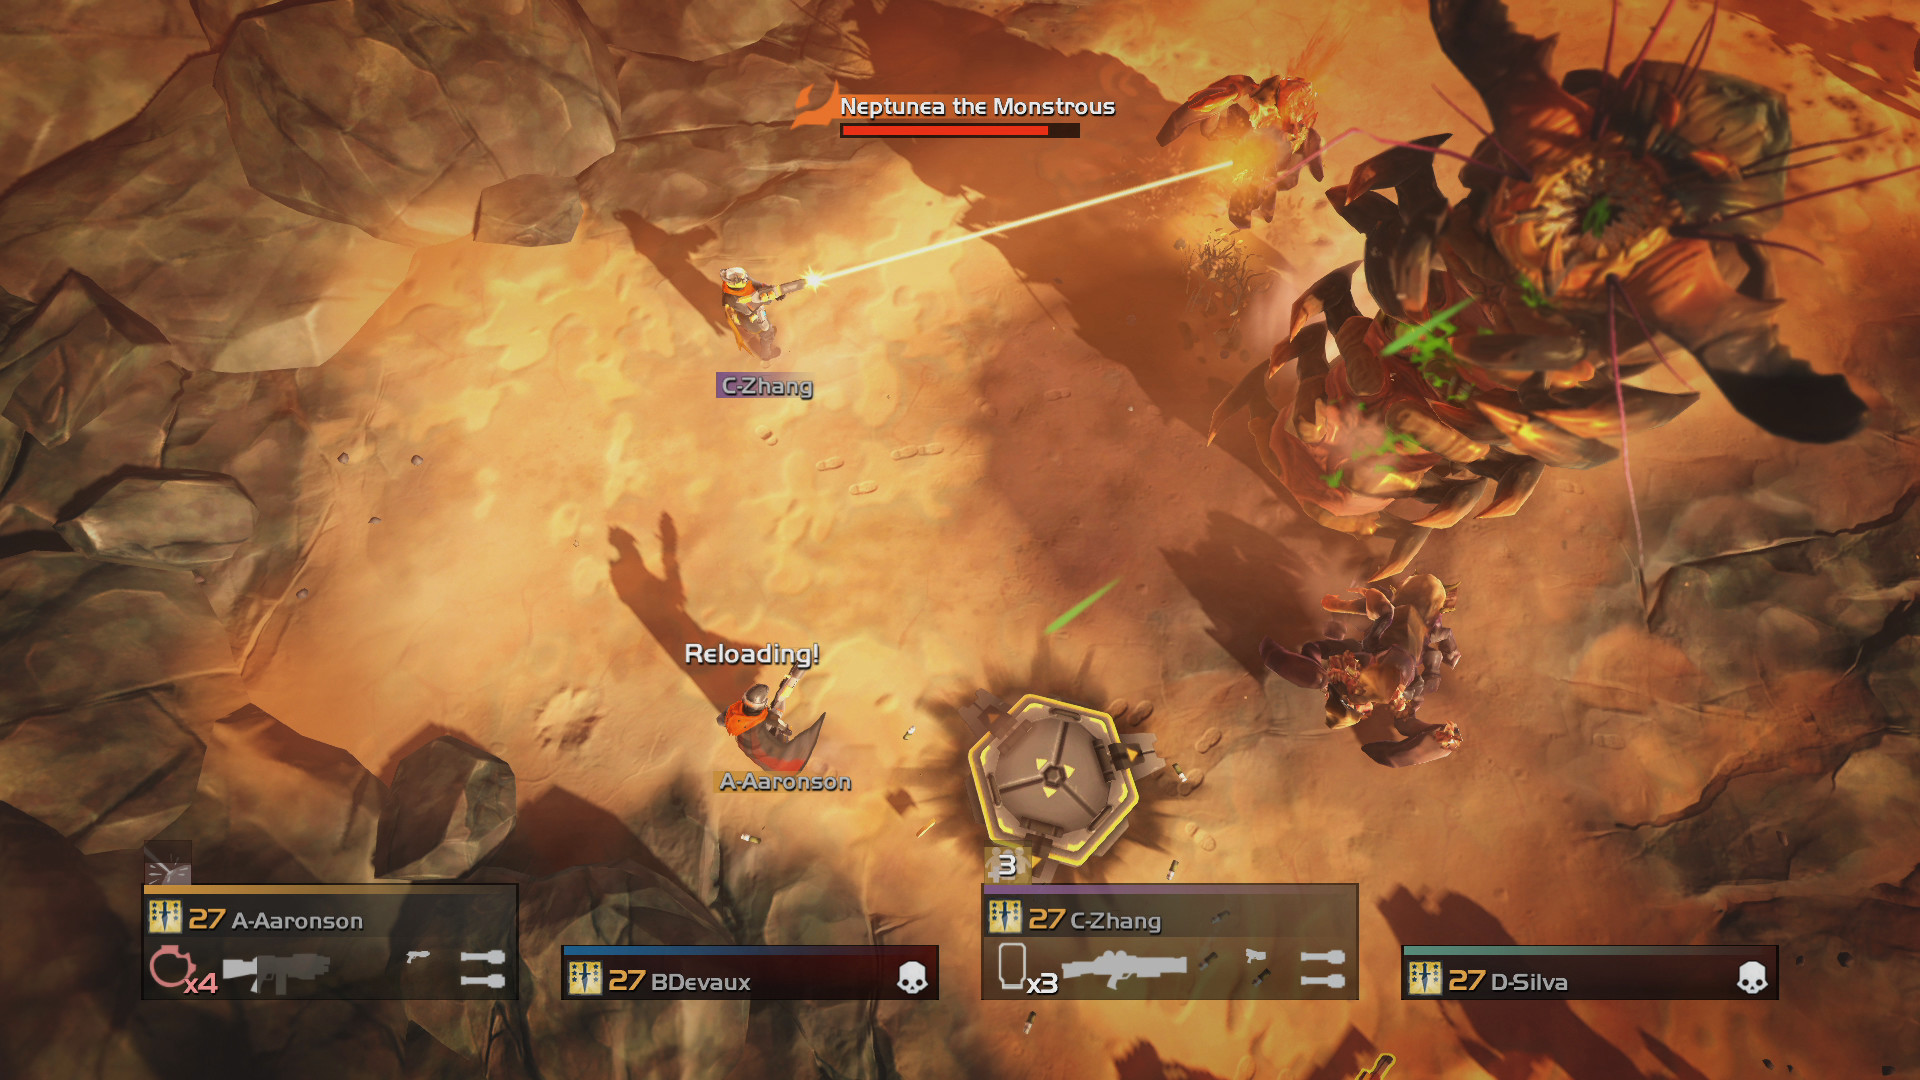 A boss fight in Helldivers.